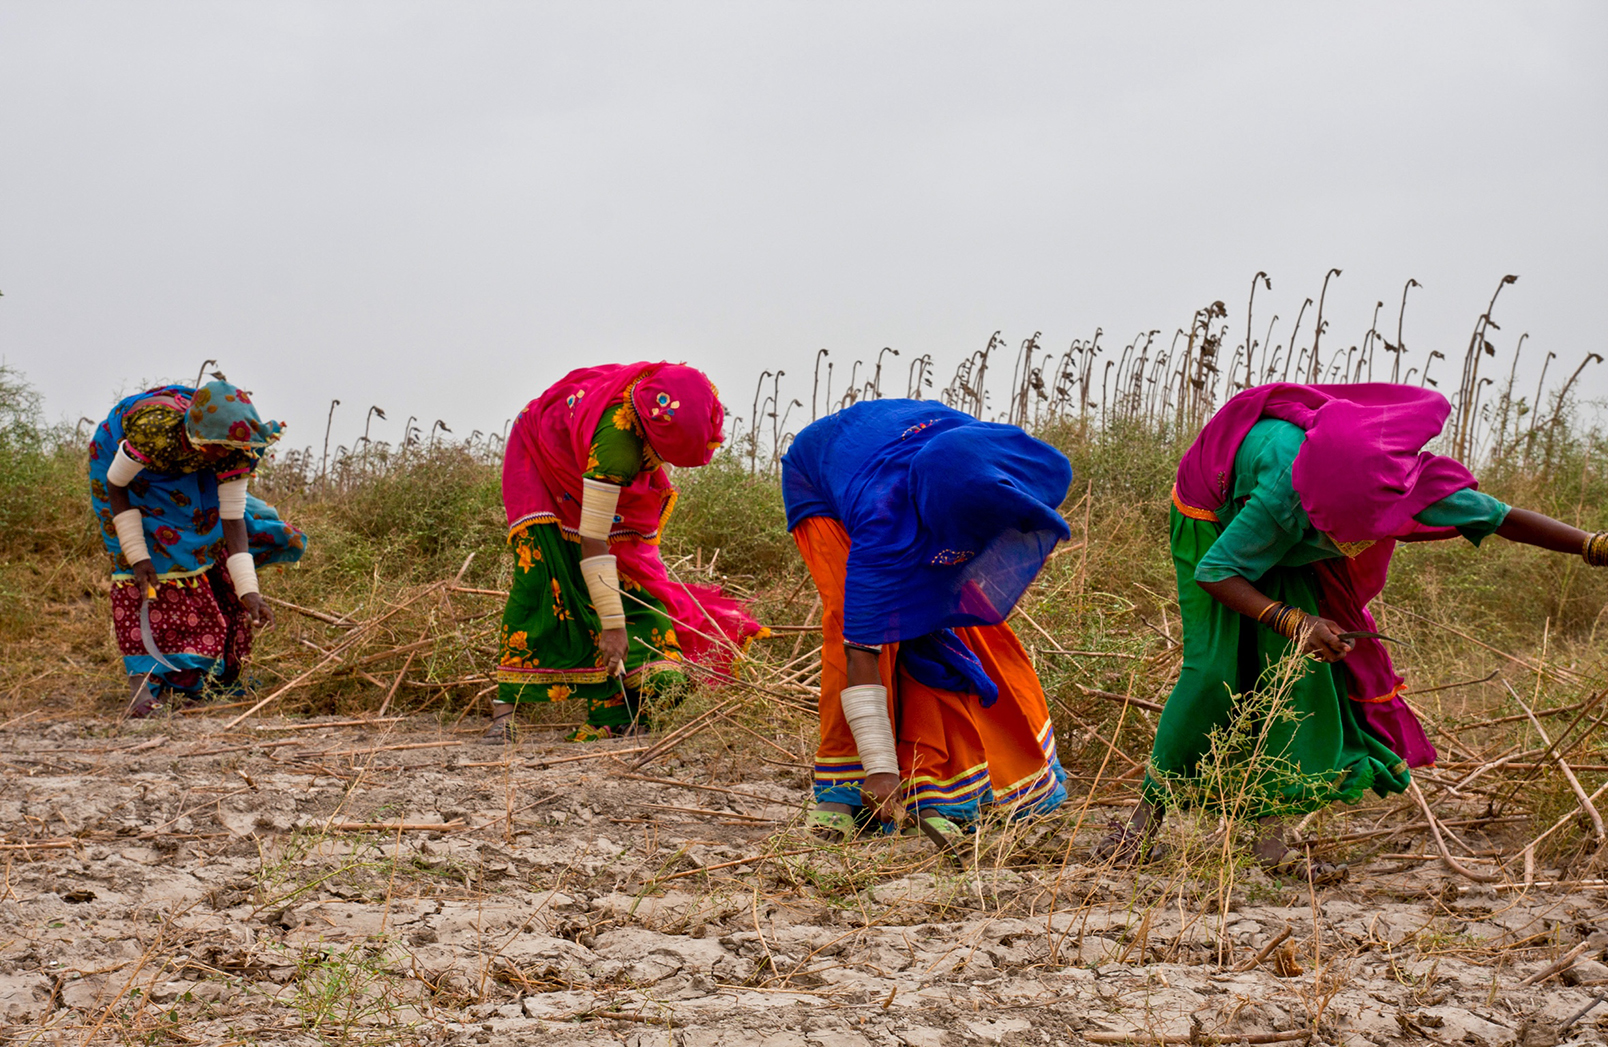 Women working in agriculture in Sindh, Pakistan.